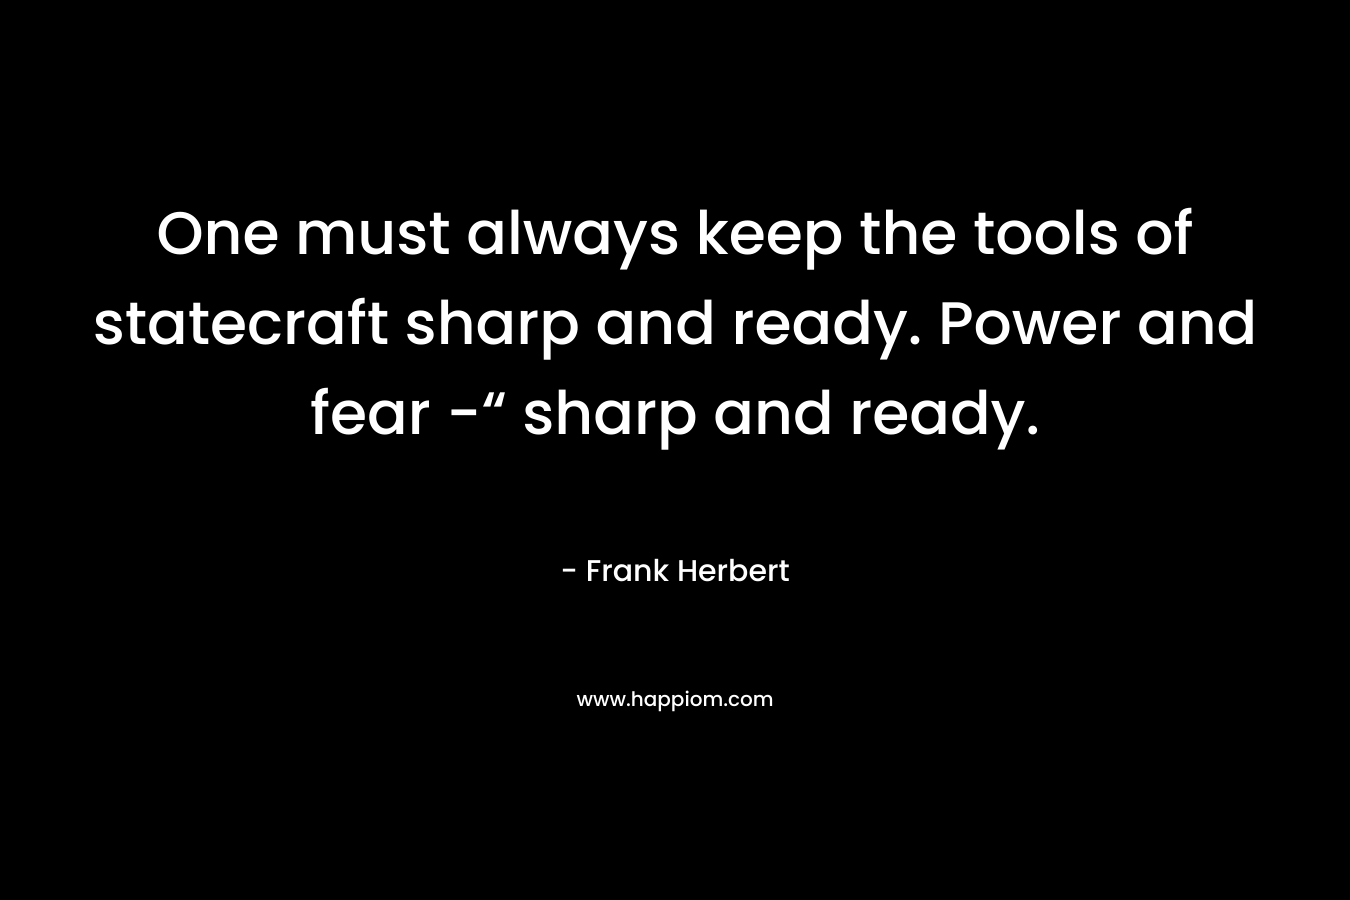 One must always keep the tools of statecraft sharp and ready. Power and fear -“ sharp and ready.